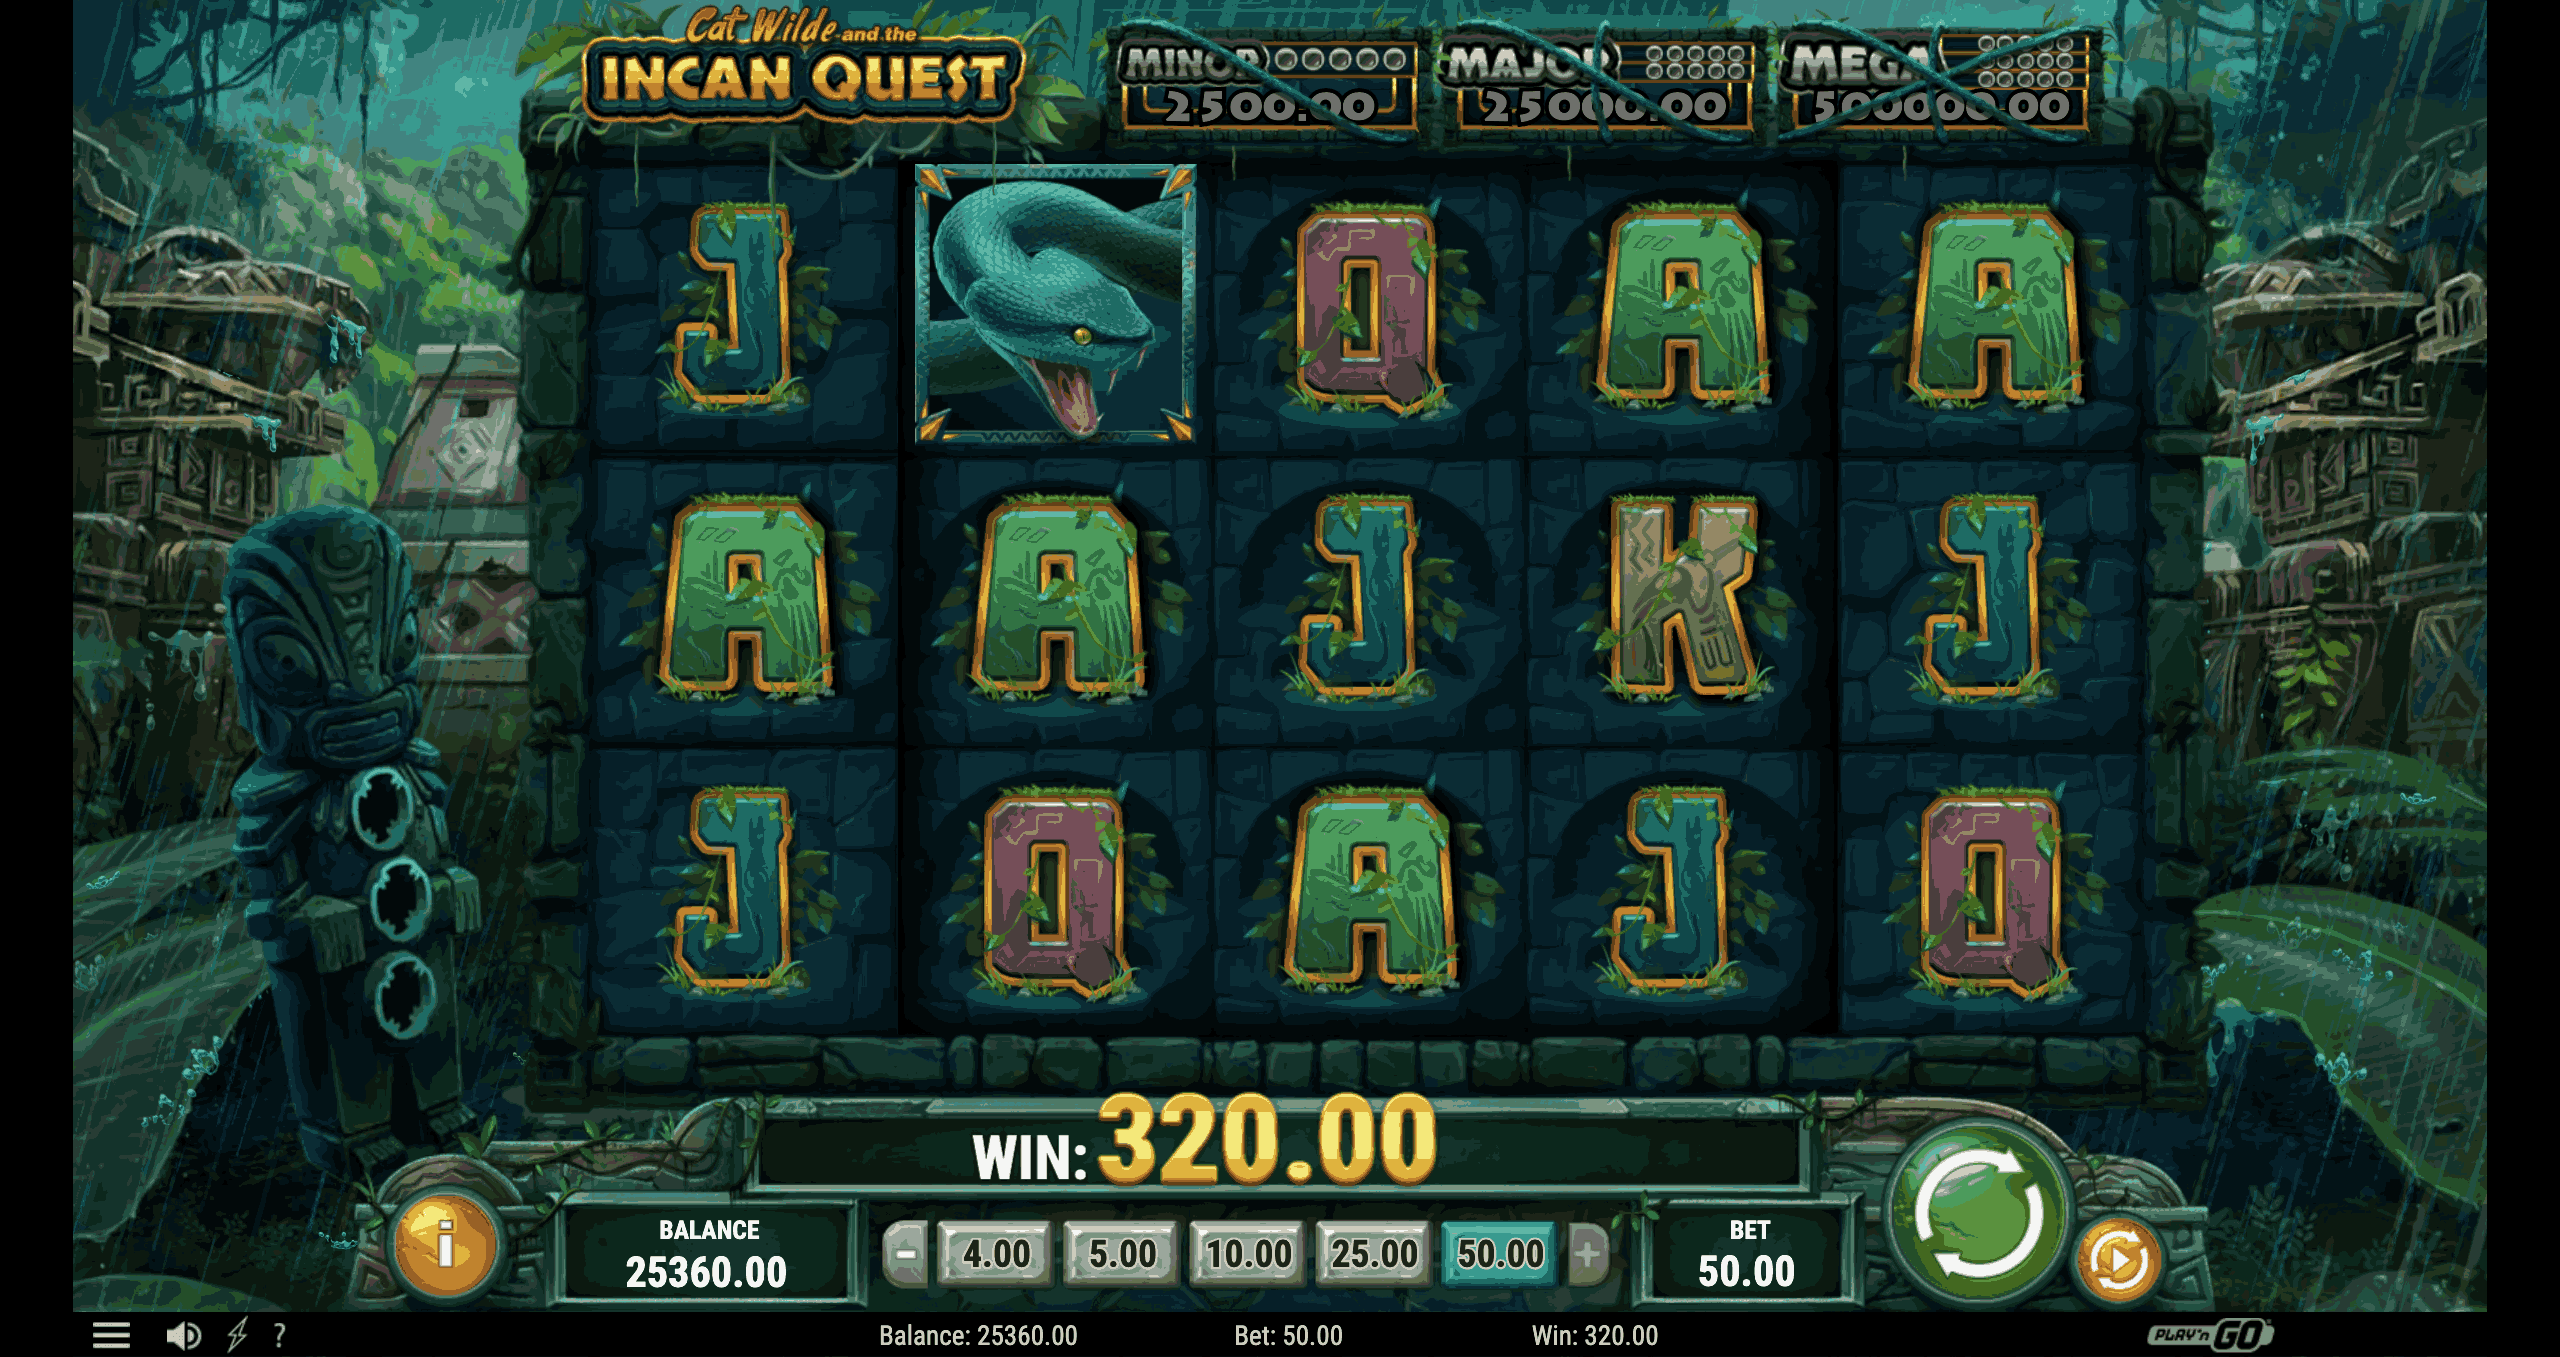 Cat Wilde and the Incan Quest Slot - 3